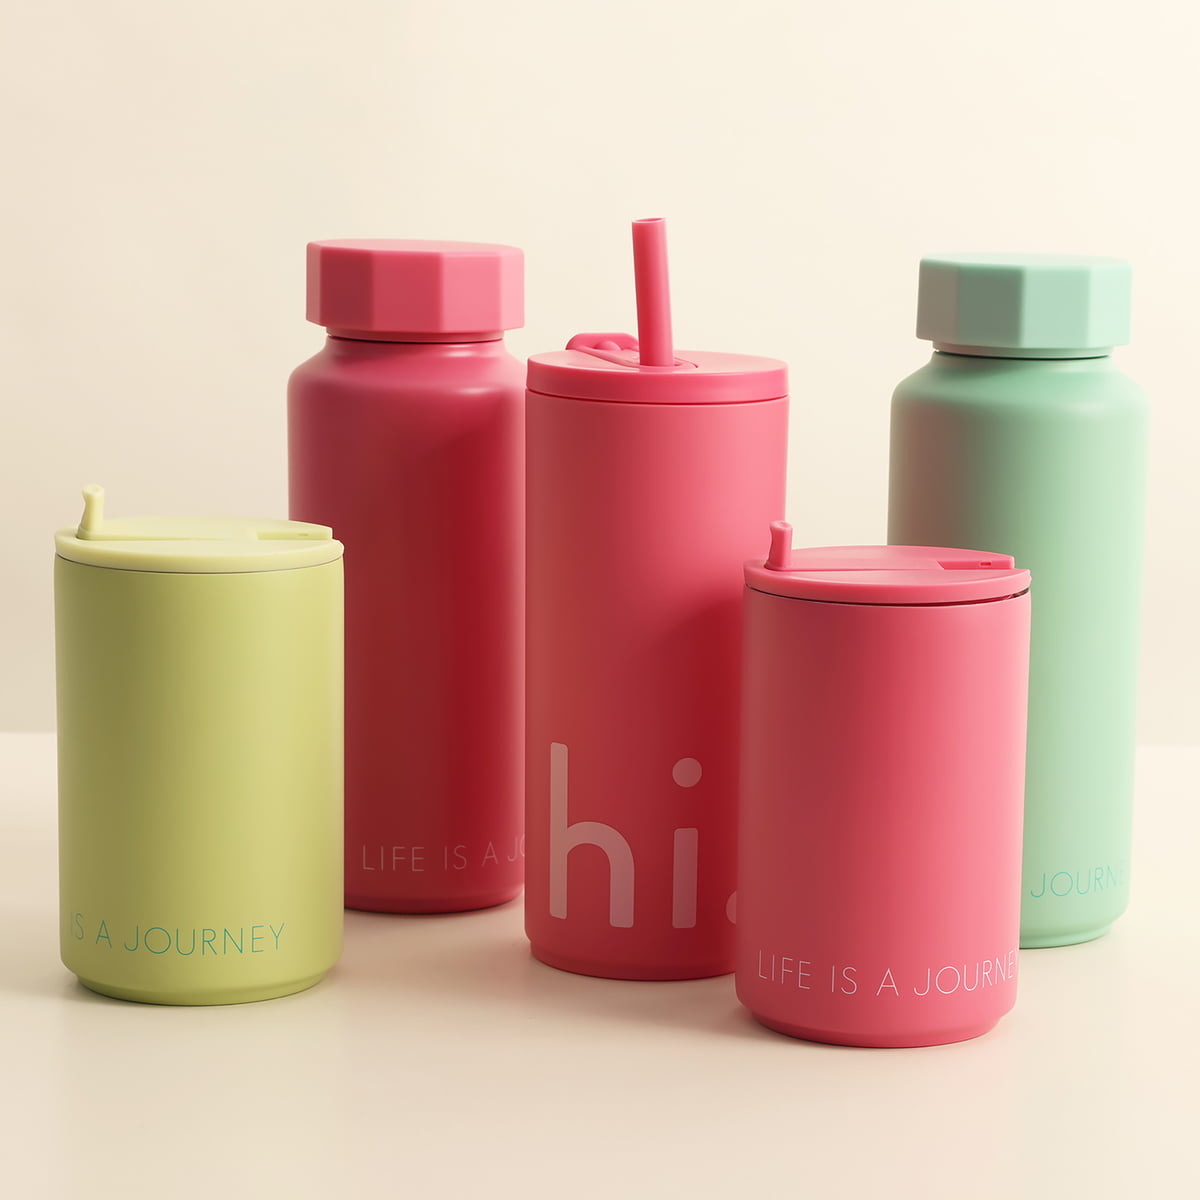 https://cdn.connox.com/m/100035/632295/media/Design-Letters/2023/Design-Letters-AJ-Thermosflasche-Hot-Cold-cherry-pink-green-bliss-Situation.jpg